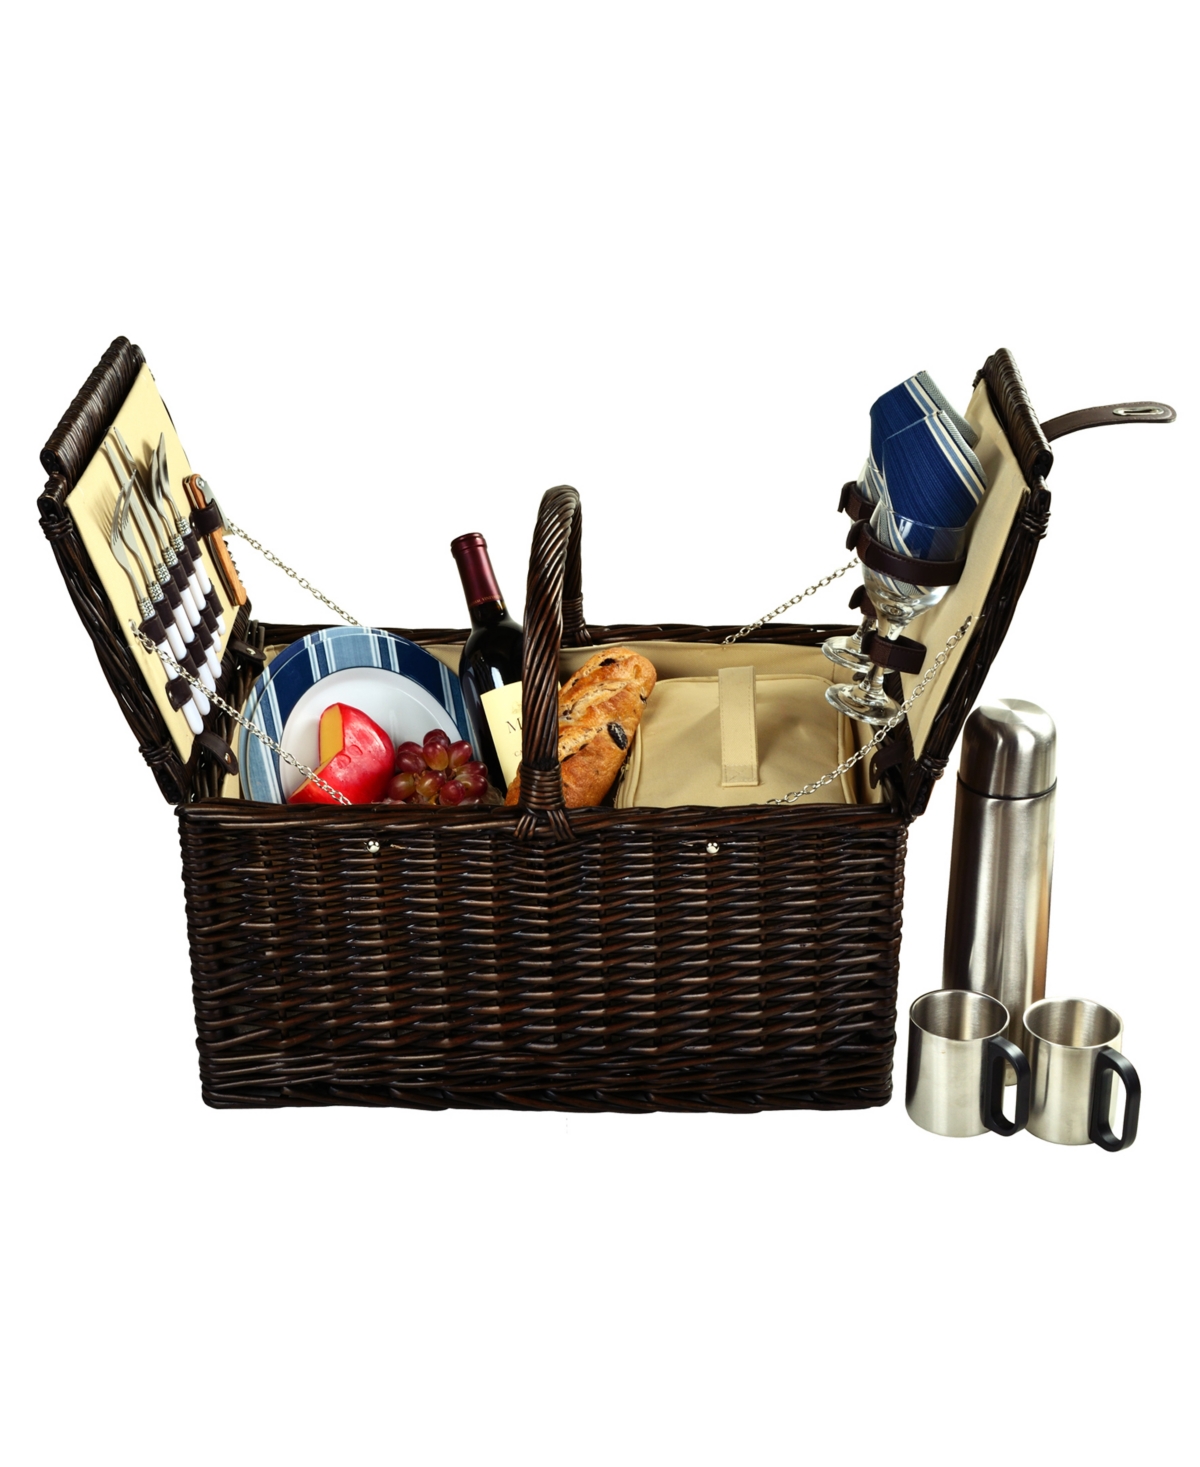 Surrey Willow Picnic Basket with Coffee Set -Service for 2 - Orange